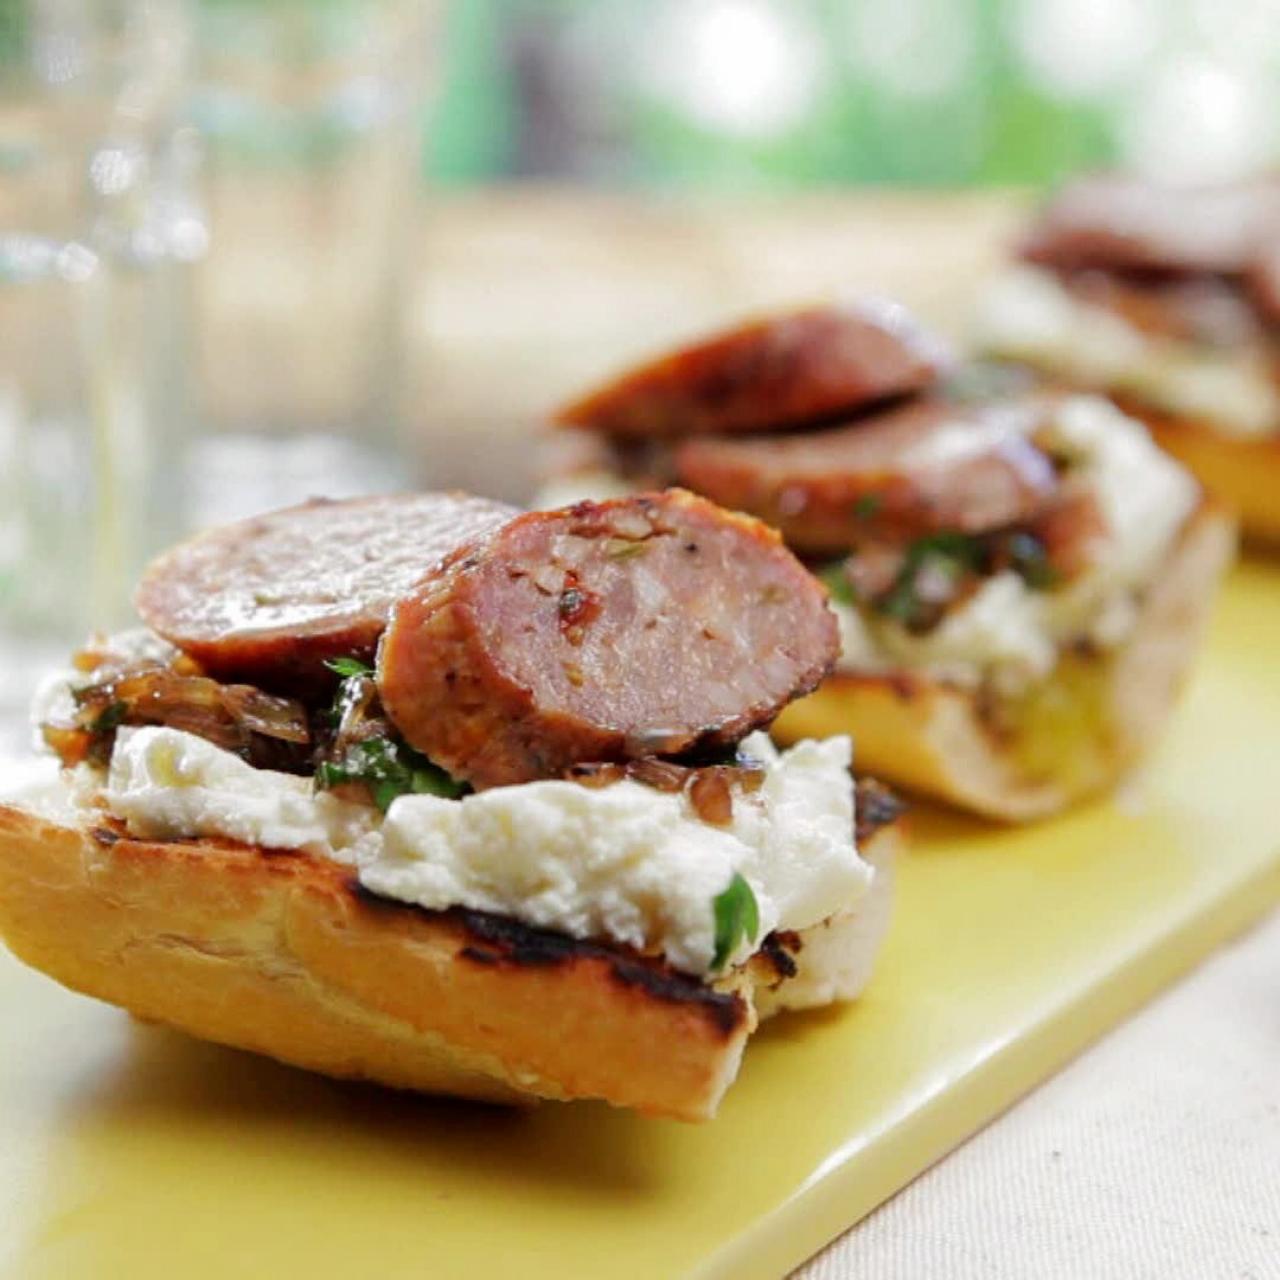 https://food.fnr.sndimg.com/content/dam/images/food/fullset/2013/7/18/0/QF0304H_grilled-sausages-with-grilled-shallot-relish-with-fresh-ricotta-and-toasted-baguette-recipe_s4x3.jpg.rend.hgtvcom.1280.1280.suffix/1377795425276.jpeg